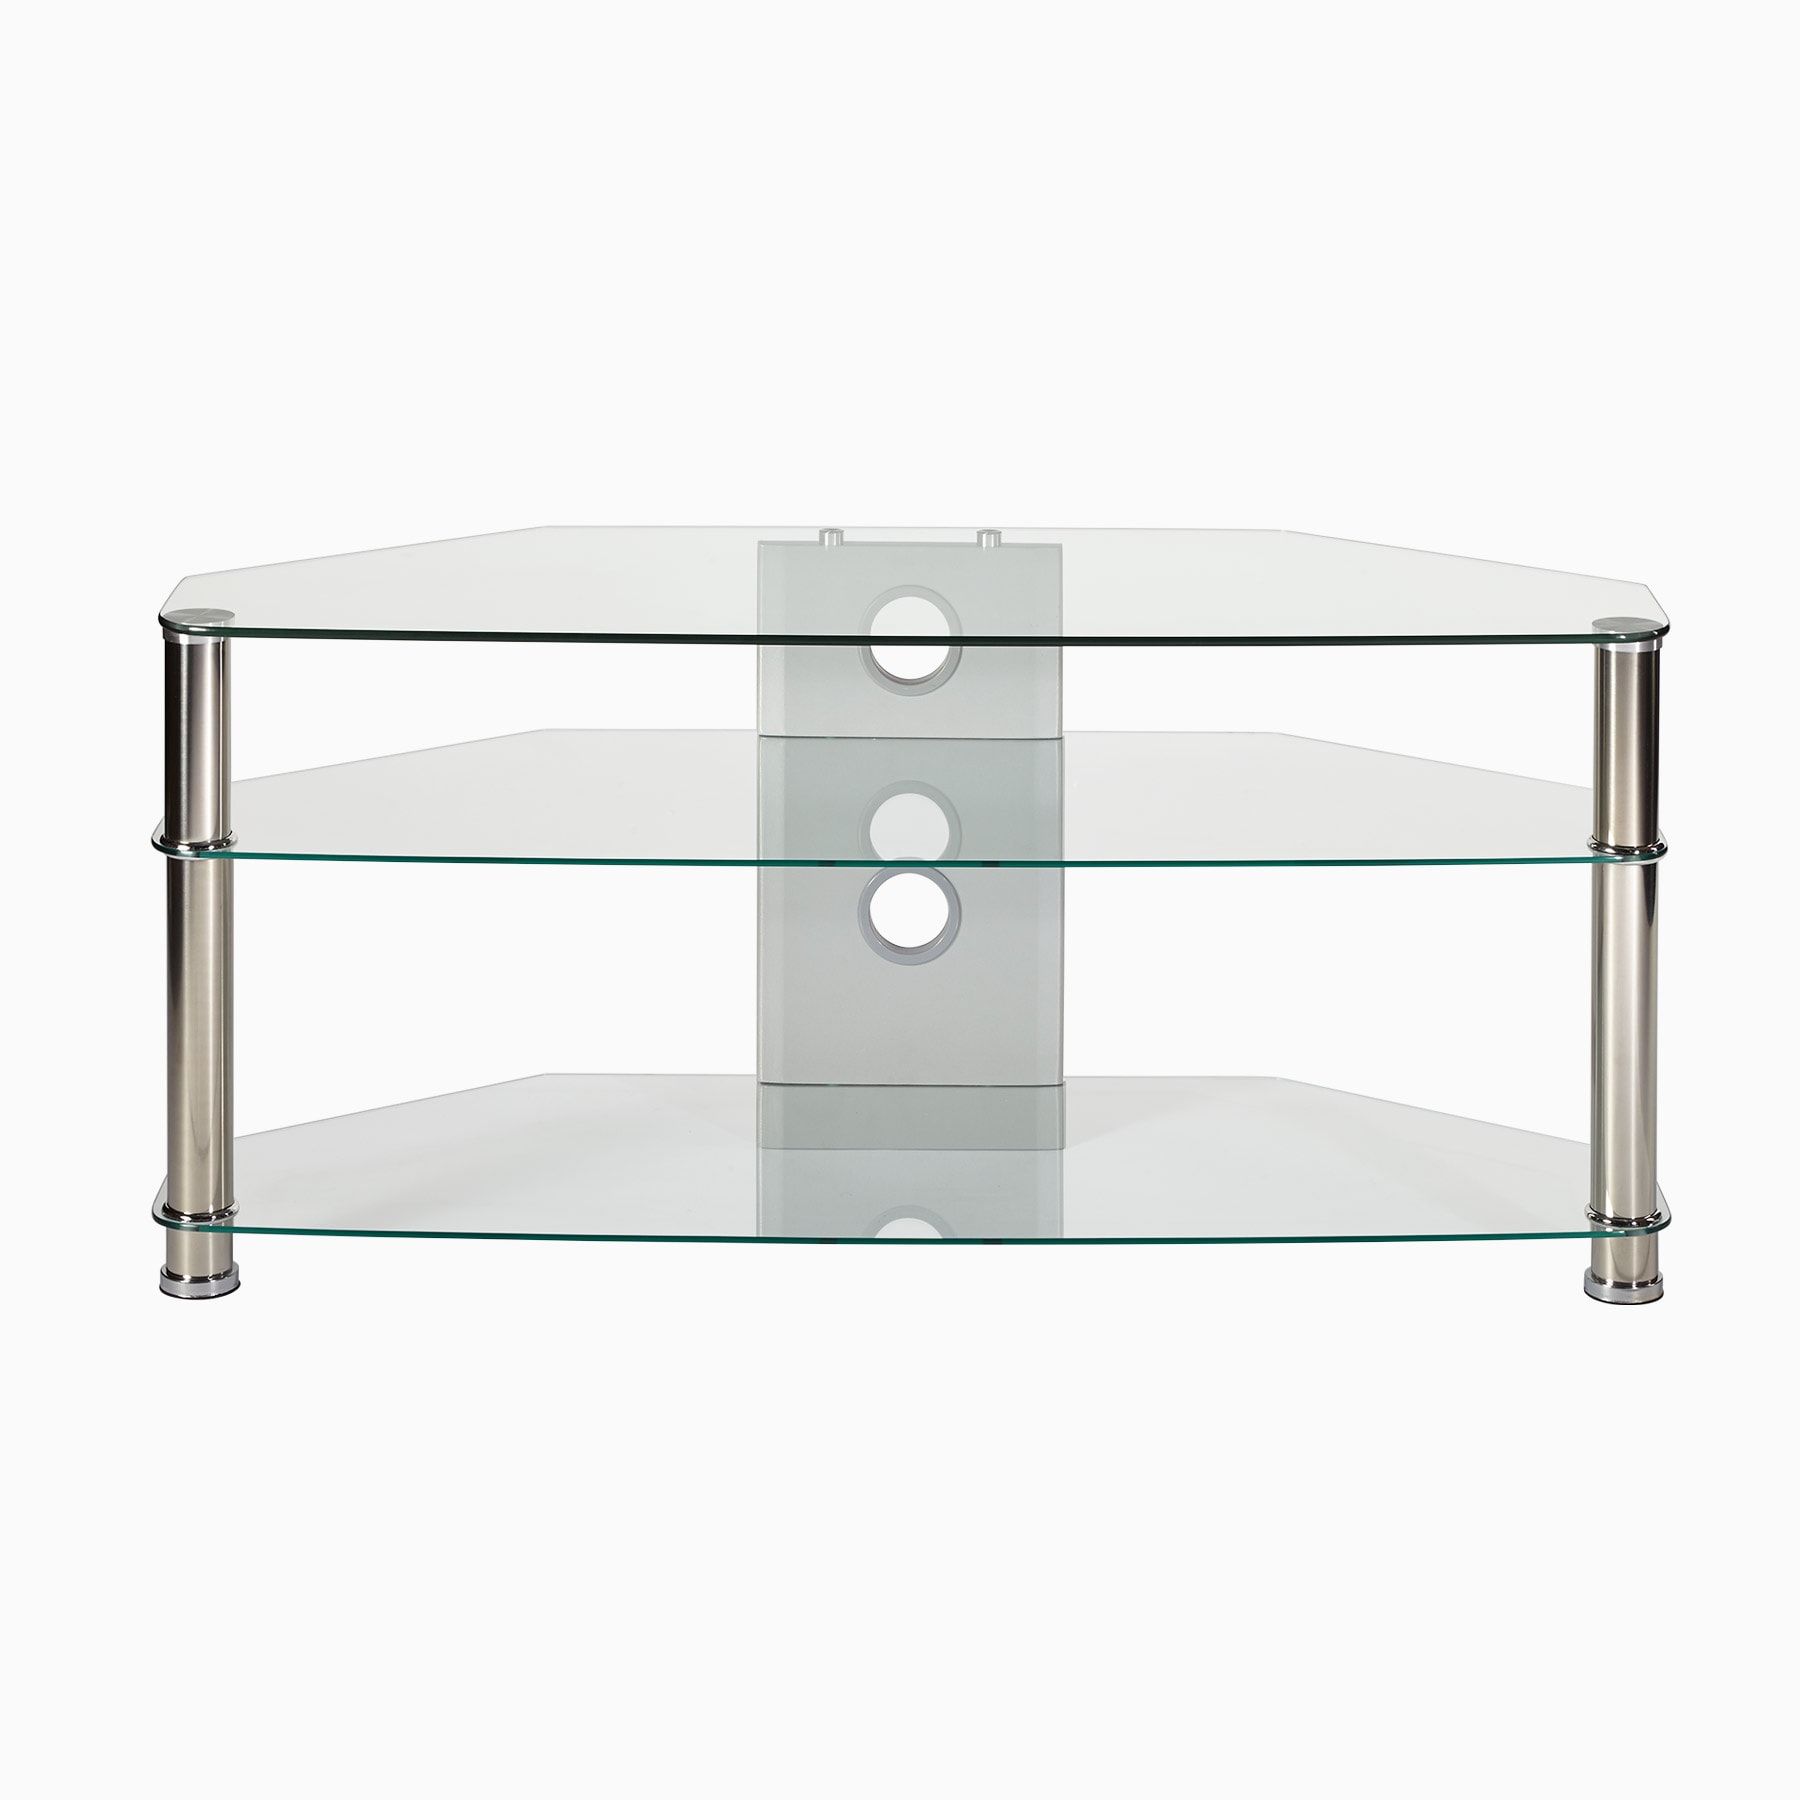 Large Clear Glass Corner Tv Stand Up To 55 Intended For Corner 55 Inch Tv Stands (View 9 of 15)